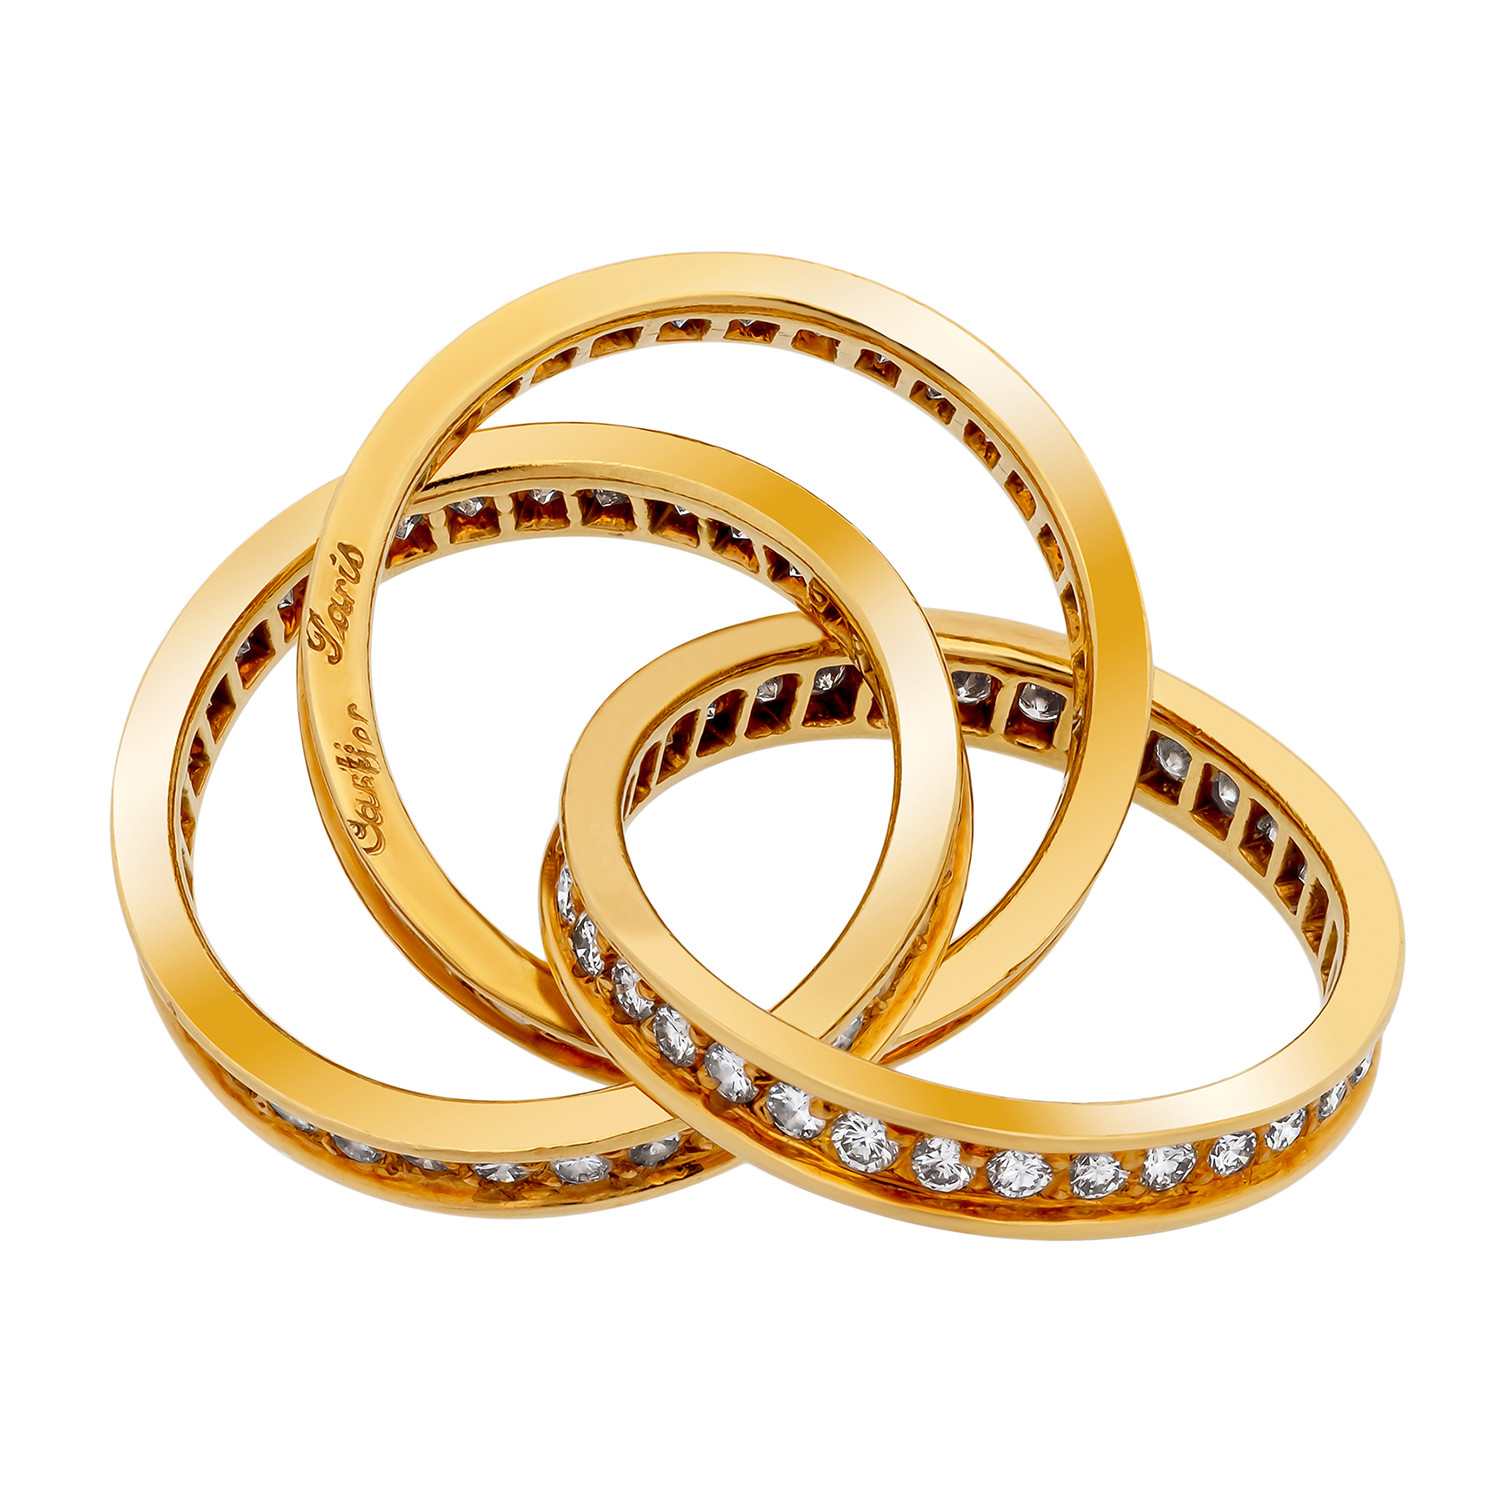 Vintage Cartier 18k Yellow Gold Trinity Diamond Ring // Ring Size: 4.75 ...